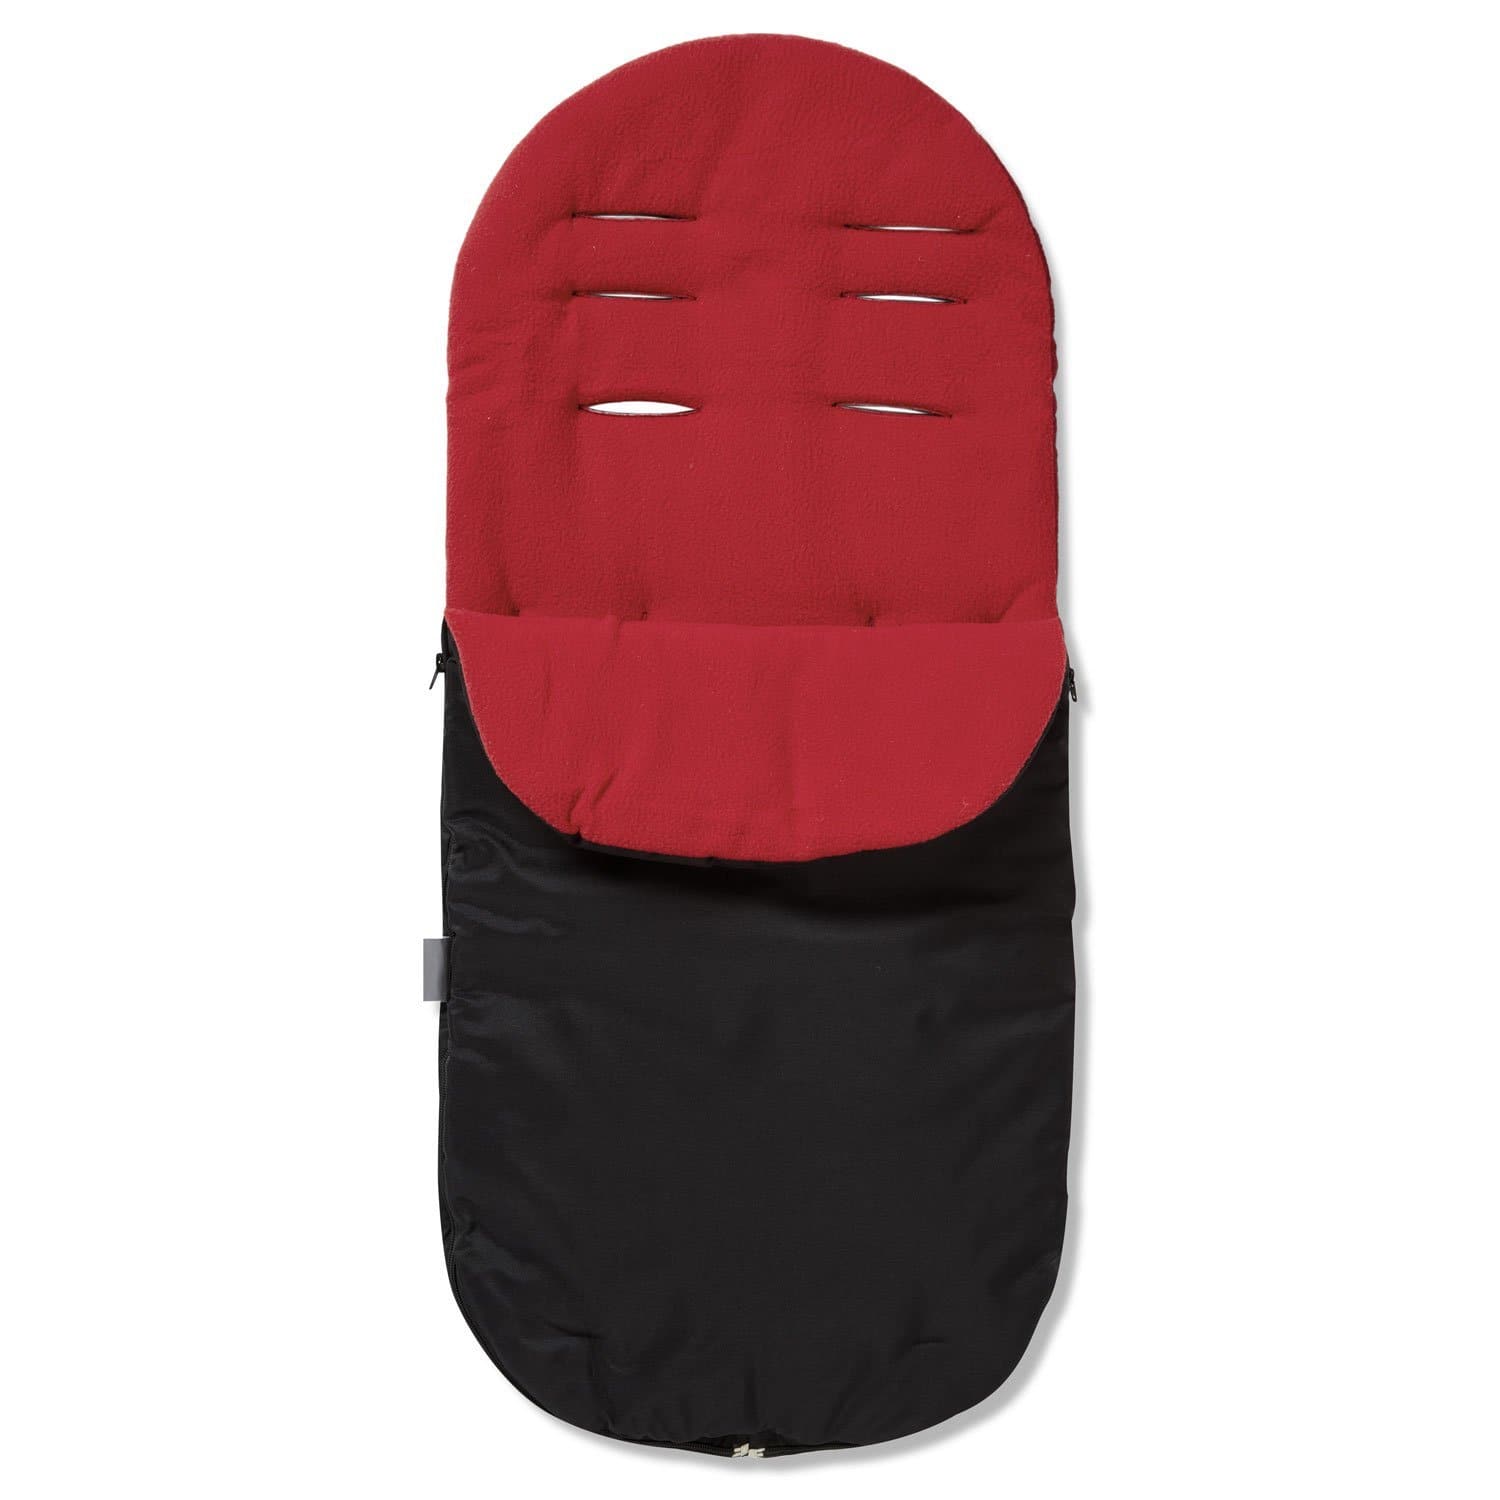 Footmuff / Cosy Toes Compatible with Cybex - Red / Fits All Models | For Your Little One